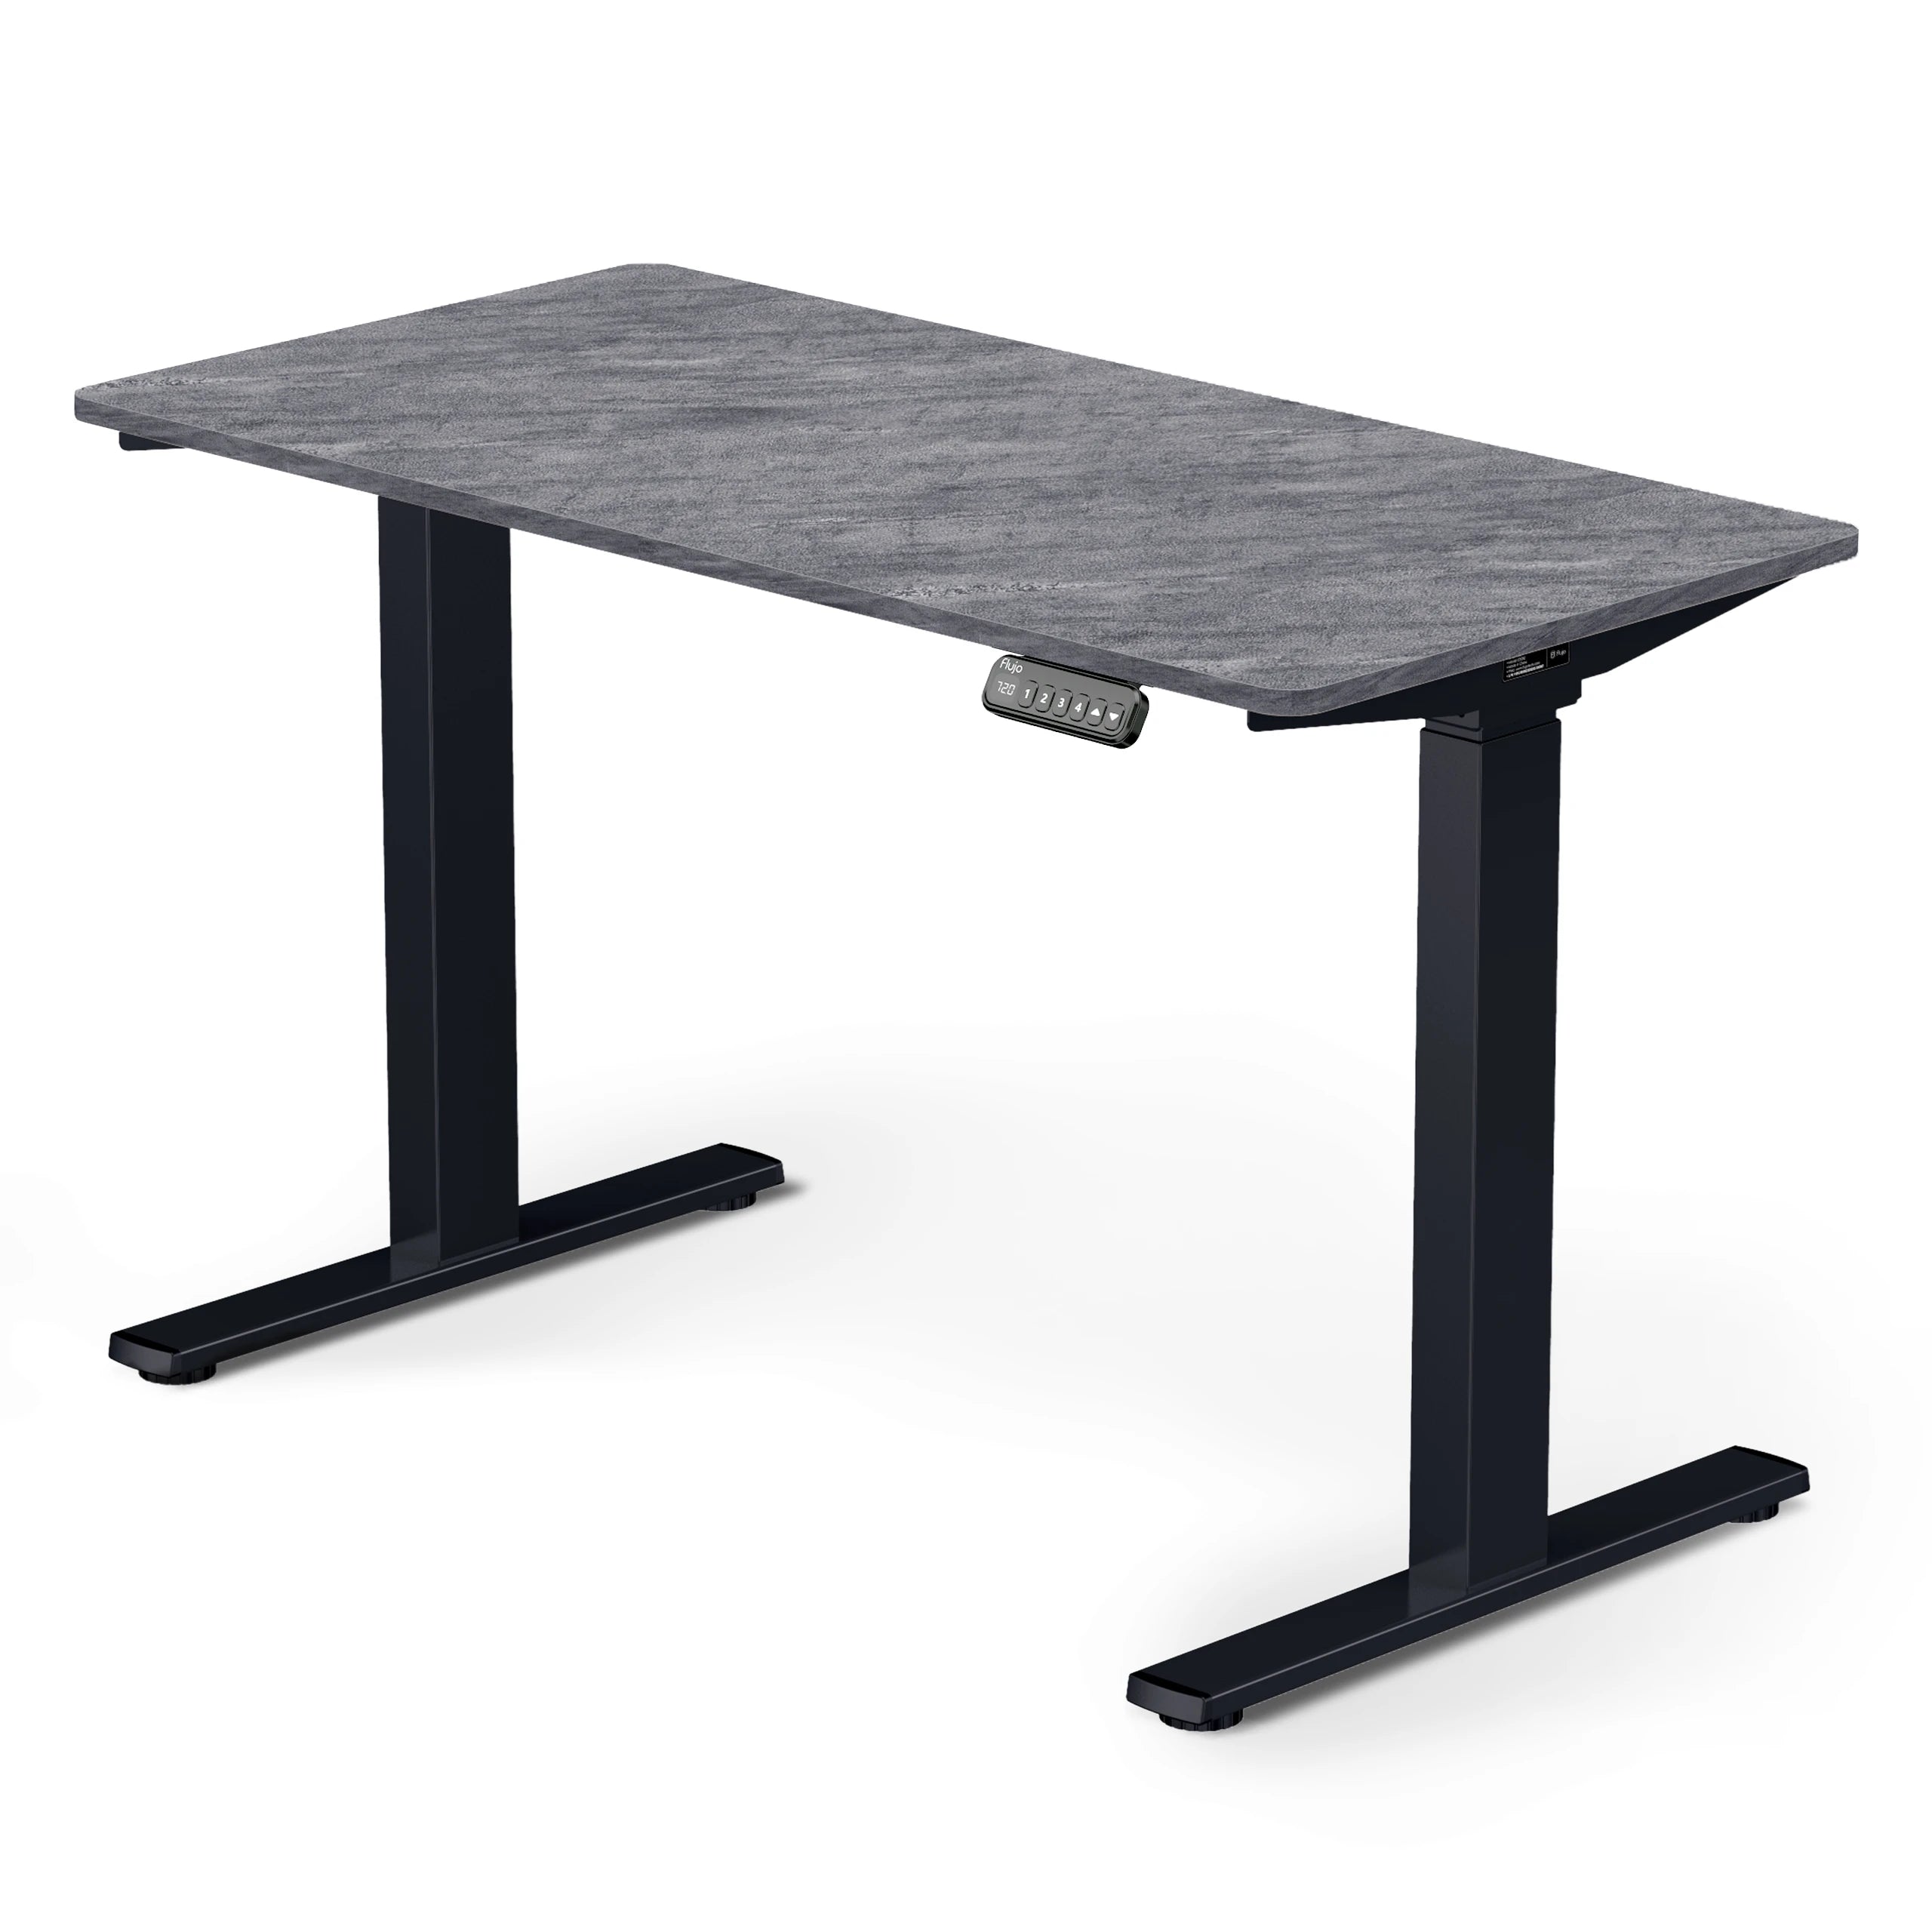 Adjustable height standing desk with a Rock Grey colour table  top and black legs frame, featuring a digital keypad control panel